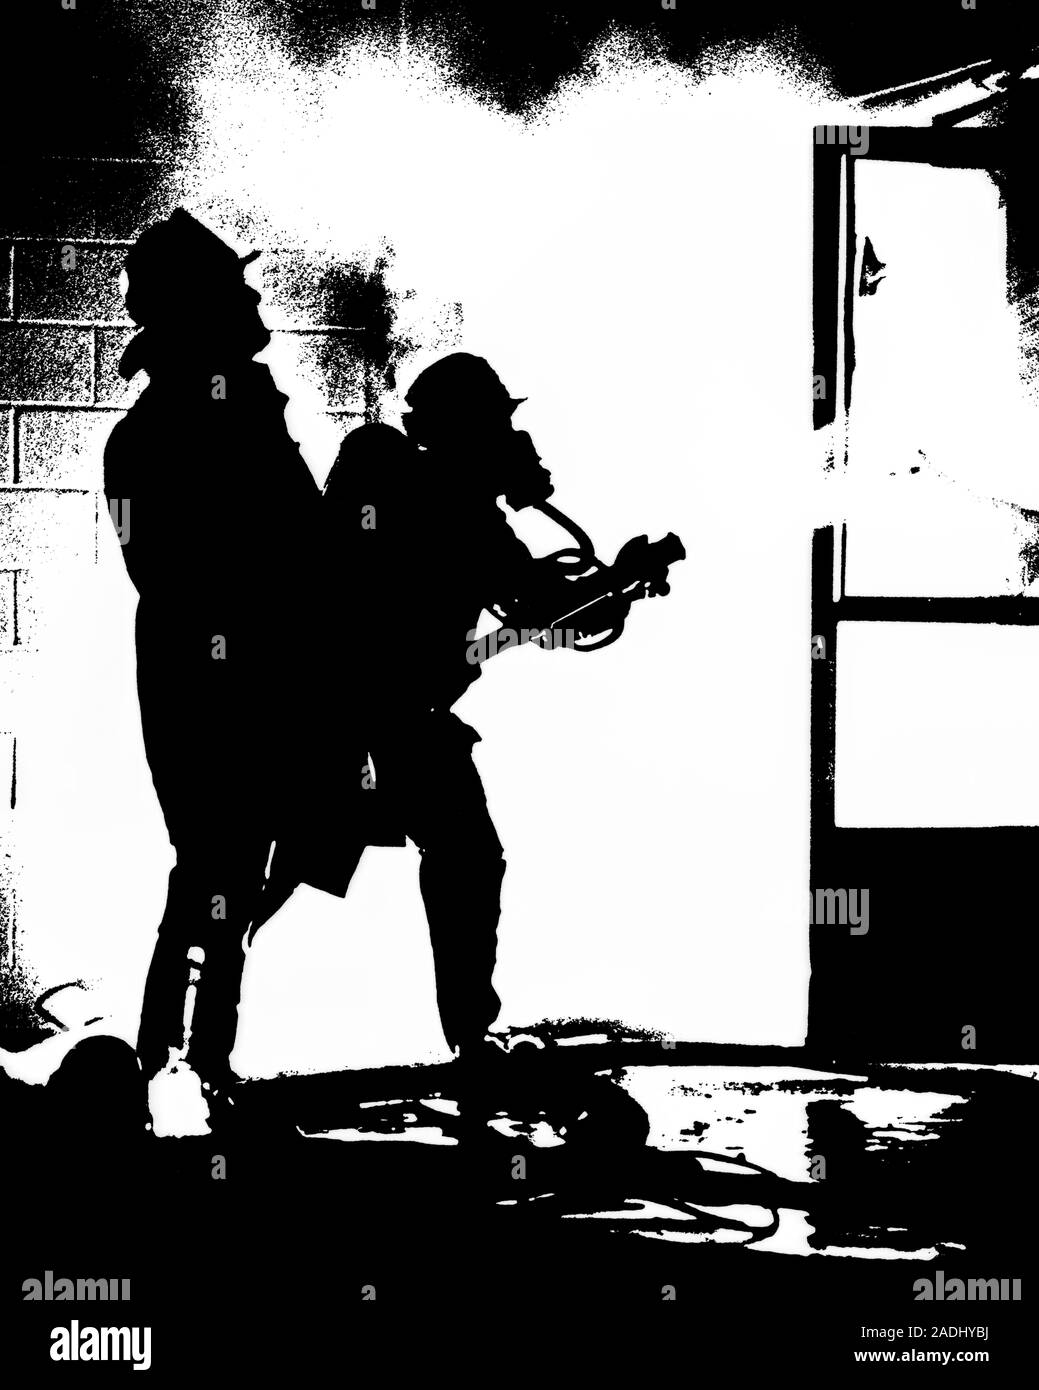 1970s PAIR OF ANONYMOUS SILHOUETTED FIREFIGHTERS POINTING FIRE HOSE THROUGH OPEN DOOR OF BURNING BUILDING SPRAYING WATER - f13322 HAR001 HARS FULL-LENGTH PHYSICAL FITNESS BURN PERSONS INSPIRATION DANGER MALES RISK DOORWAYS B&W FIREMAN DISASTER STRUCTURE ADVENTURE PROTECTION SILHOUETTED SMOKEY COURAGE CONFLAGRATION SPRAYING EXCITEMENT FLAMES INFERNO OF OCCUPATIONS BLAZE COMBUSTION CONNECTION FIREMEN CONCEPTUAL SUPPORT ANONYMOUS FIRE HOSE SYMBOLIC BURNING DOWN COOPERATION FIREFIGHTERS FIRES MID-ADULT MID-ADULT MAN SUPER HEATED TOGETHERNESS YOUNG ADULT MAN BLACK AND WHITE FIRE DEPARTMENT HAR001 Stock Photo